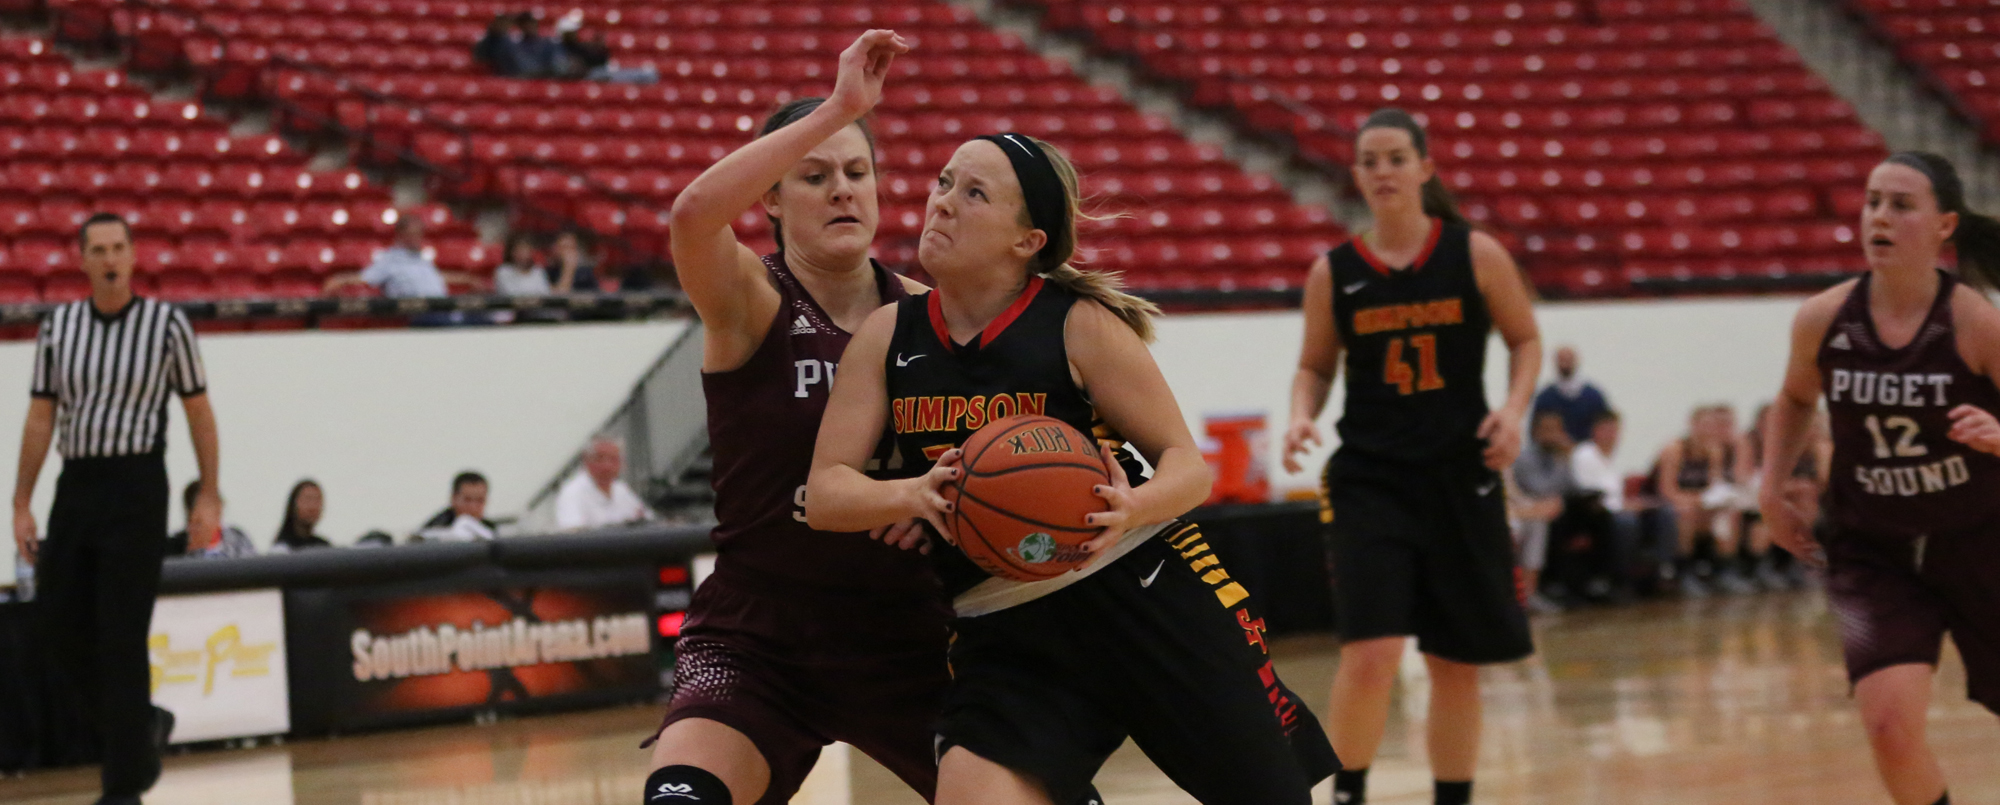 Megan Lankford scored 10 points in the Storm's 77-69 overtime loss to No. 23 Puget Sound on Thursday, Dec. 29.